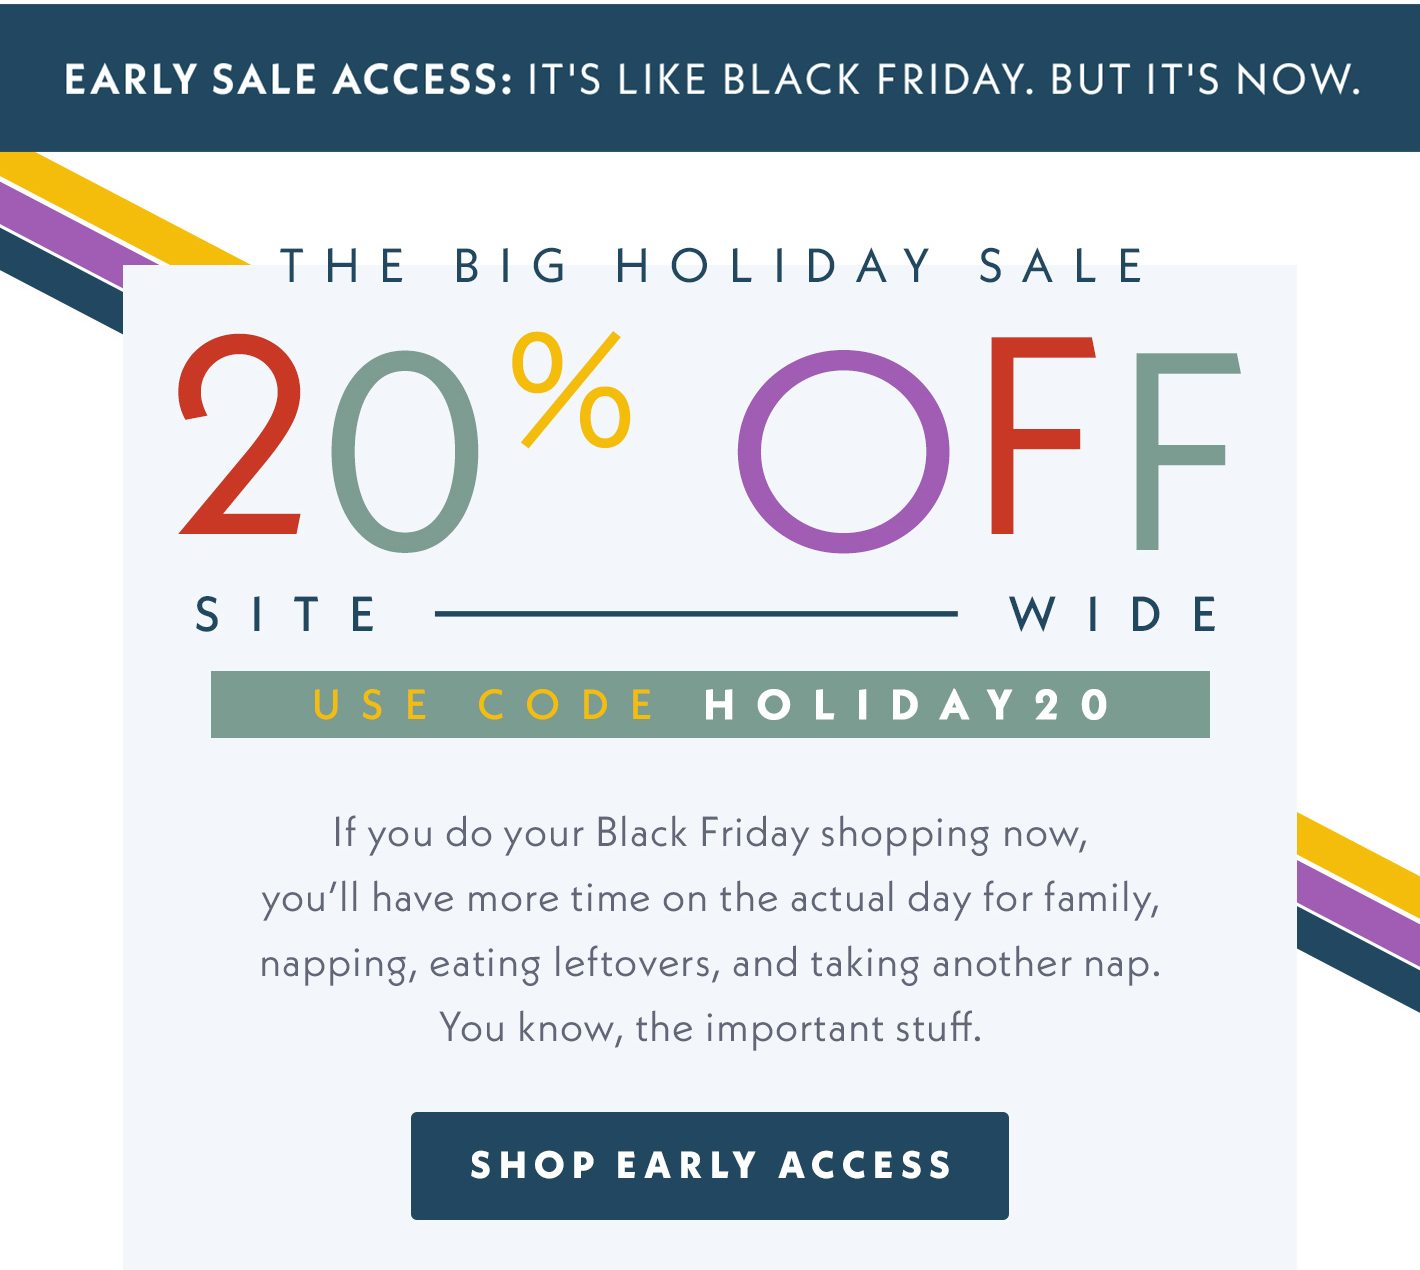 Early Sale Access: It's Like Black Friday. But It's Now. The Big Holiday Sale - 20% OFF Sitewide. Use code HOLIDAY20. If you do your Black Friday shopping now, you'll have more time on the actual day for family, napping, eating leftovers, and taking another nap. You know, the important stuff. Shop Early Access.